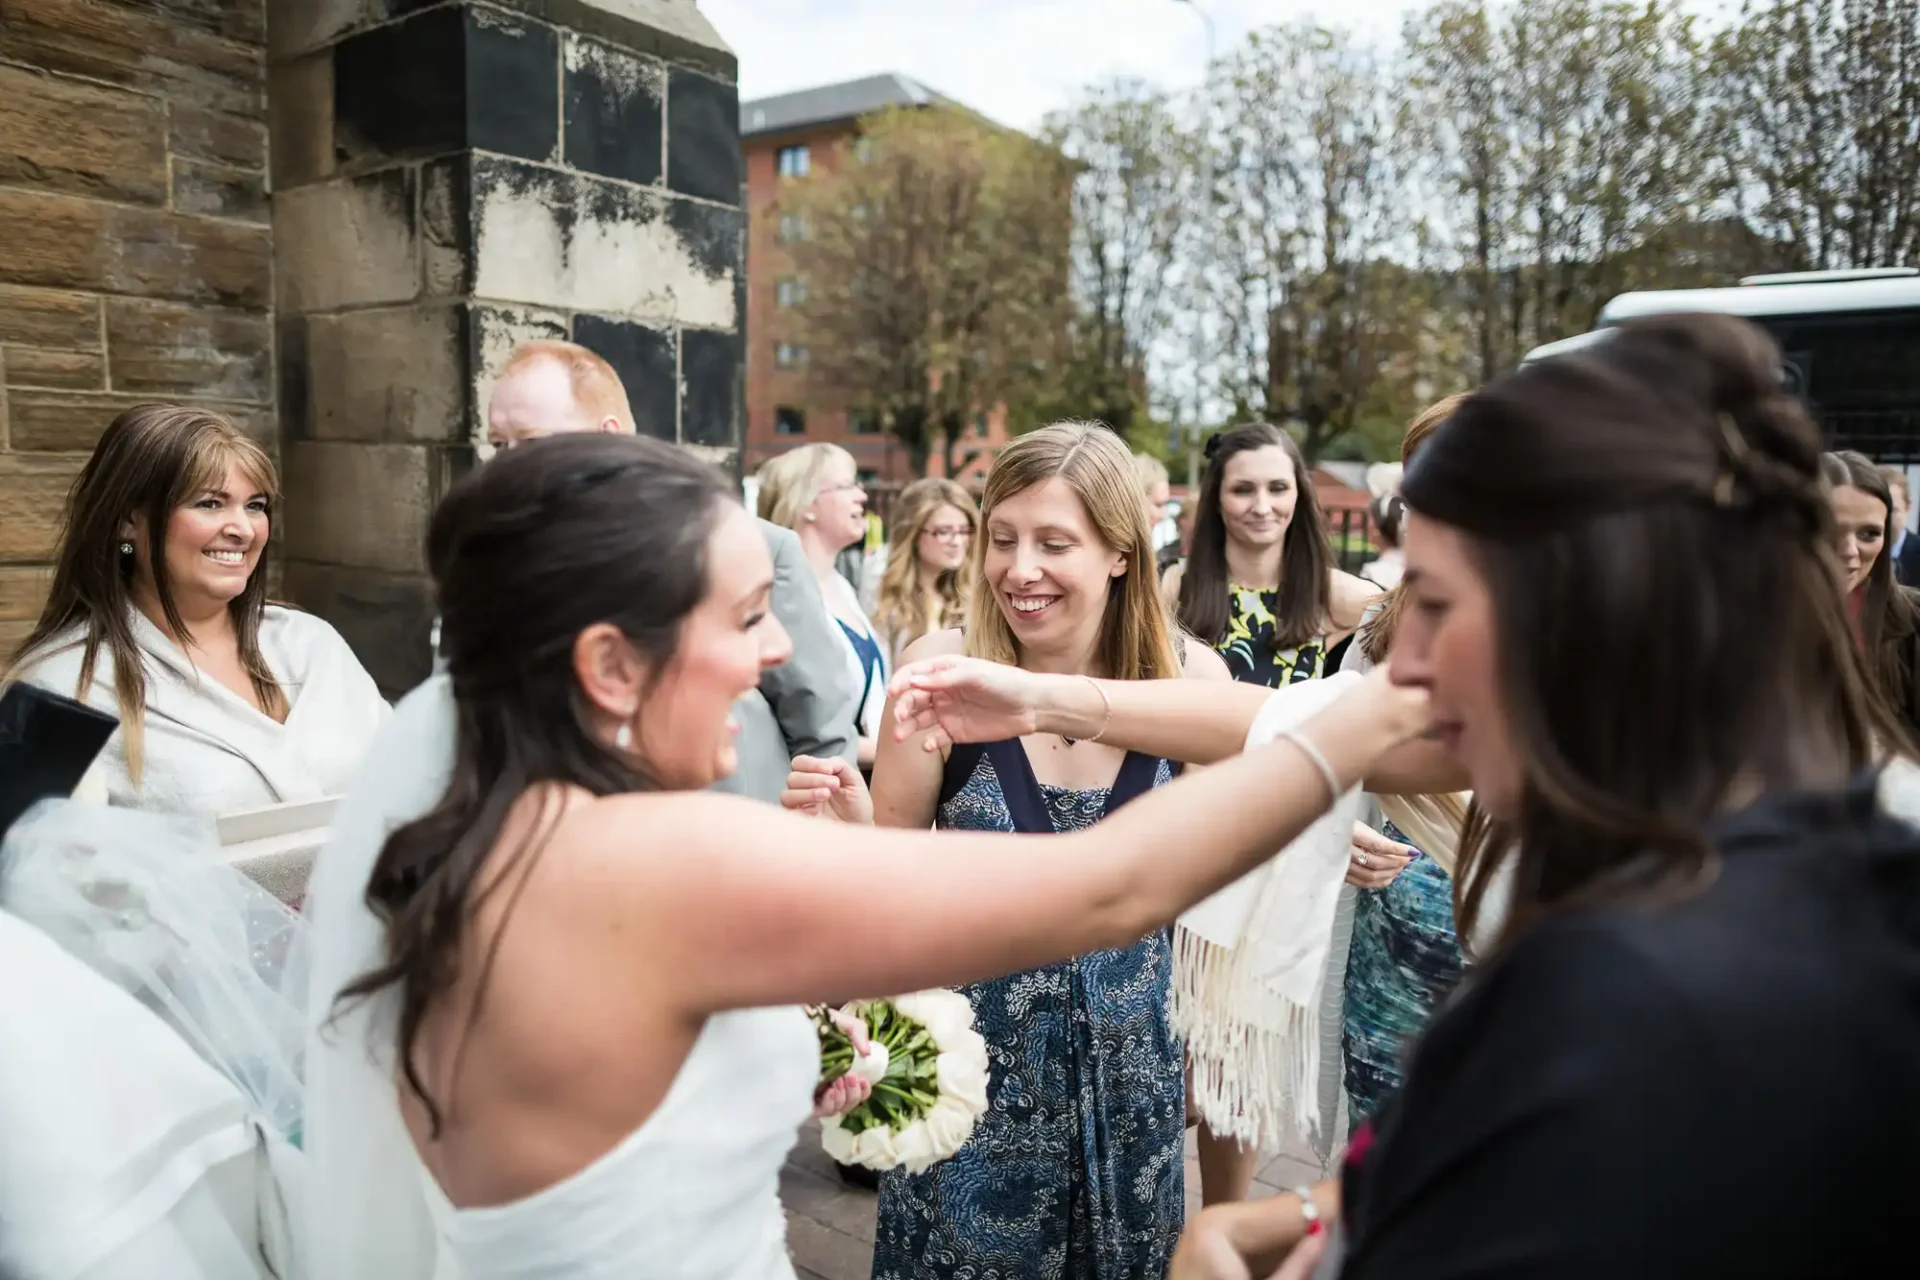 A bride in a white dress excitedly greets guests outside a building, with several smiling people surrounding her.